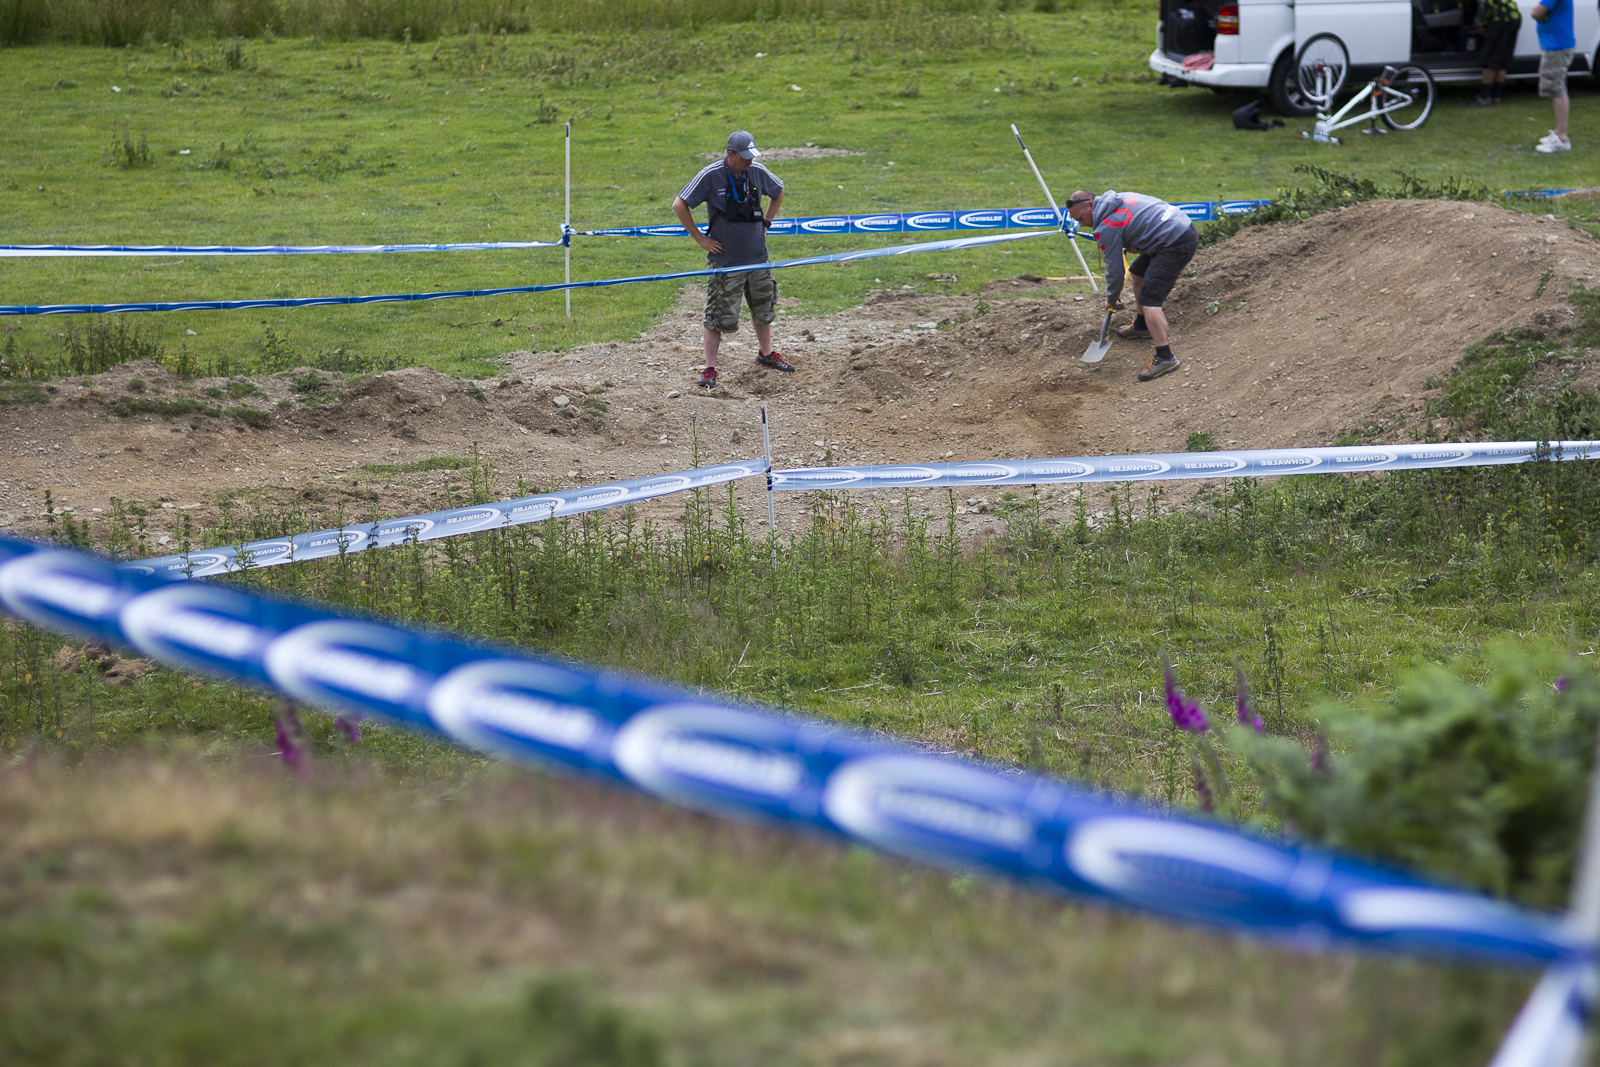 BDS organiser Si Paton got the shovel out and made some last minute improvements to the course during The Schwalbe British 4X National Championship at Moelfre Hall, Moelfre, United Kingdom. 10July,2015 Photo: Charles Robertson